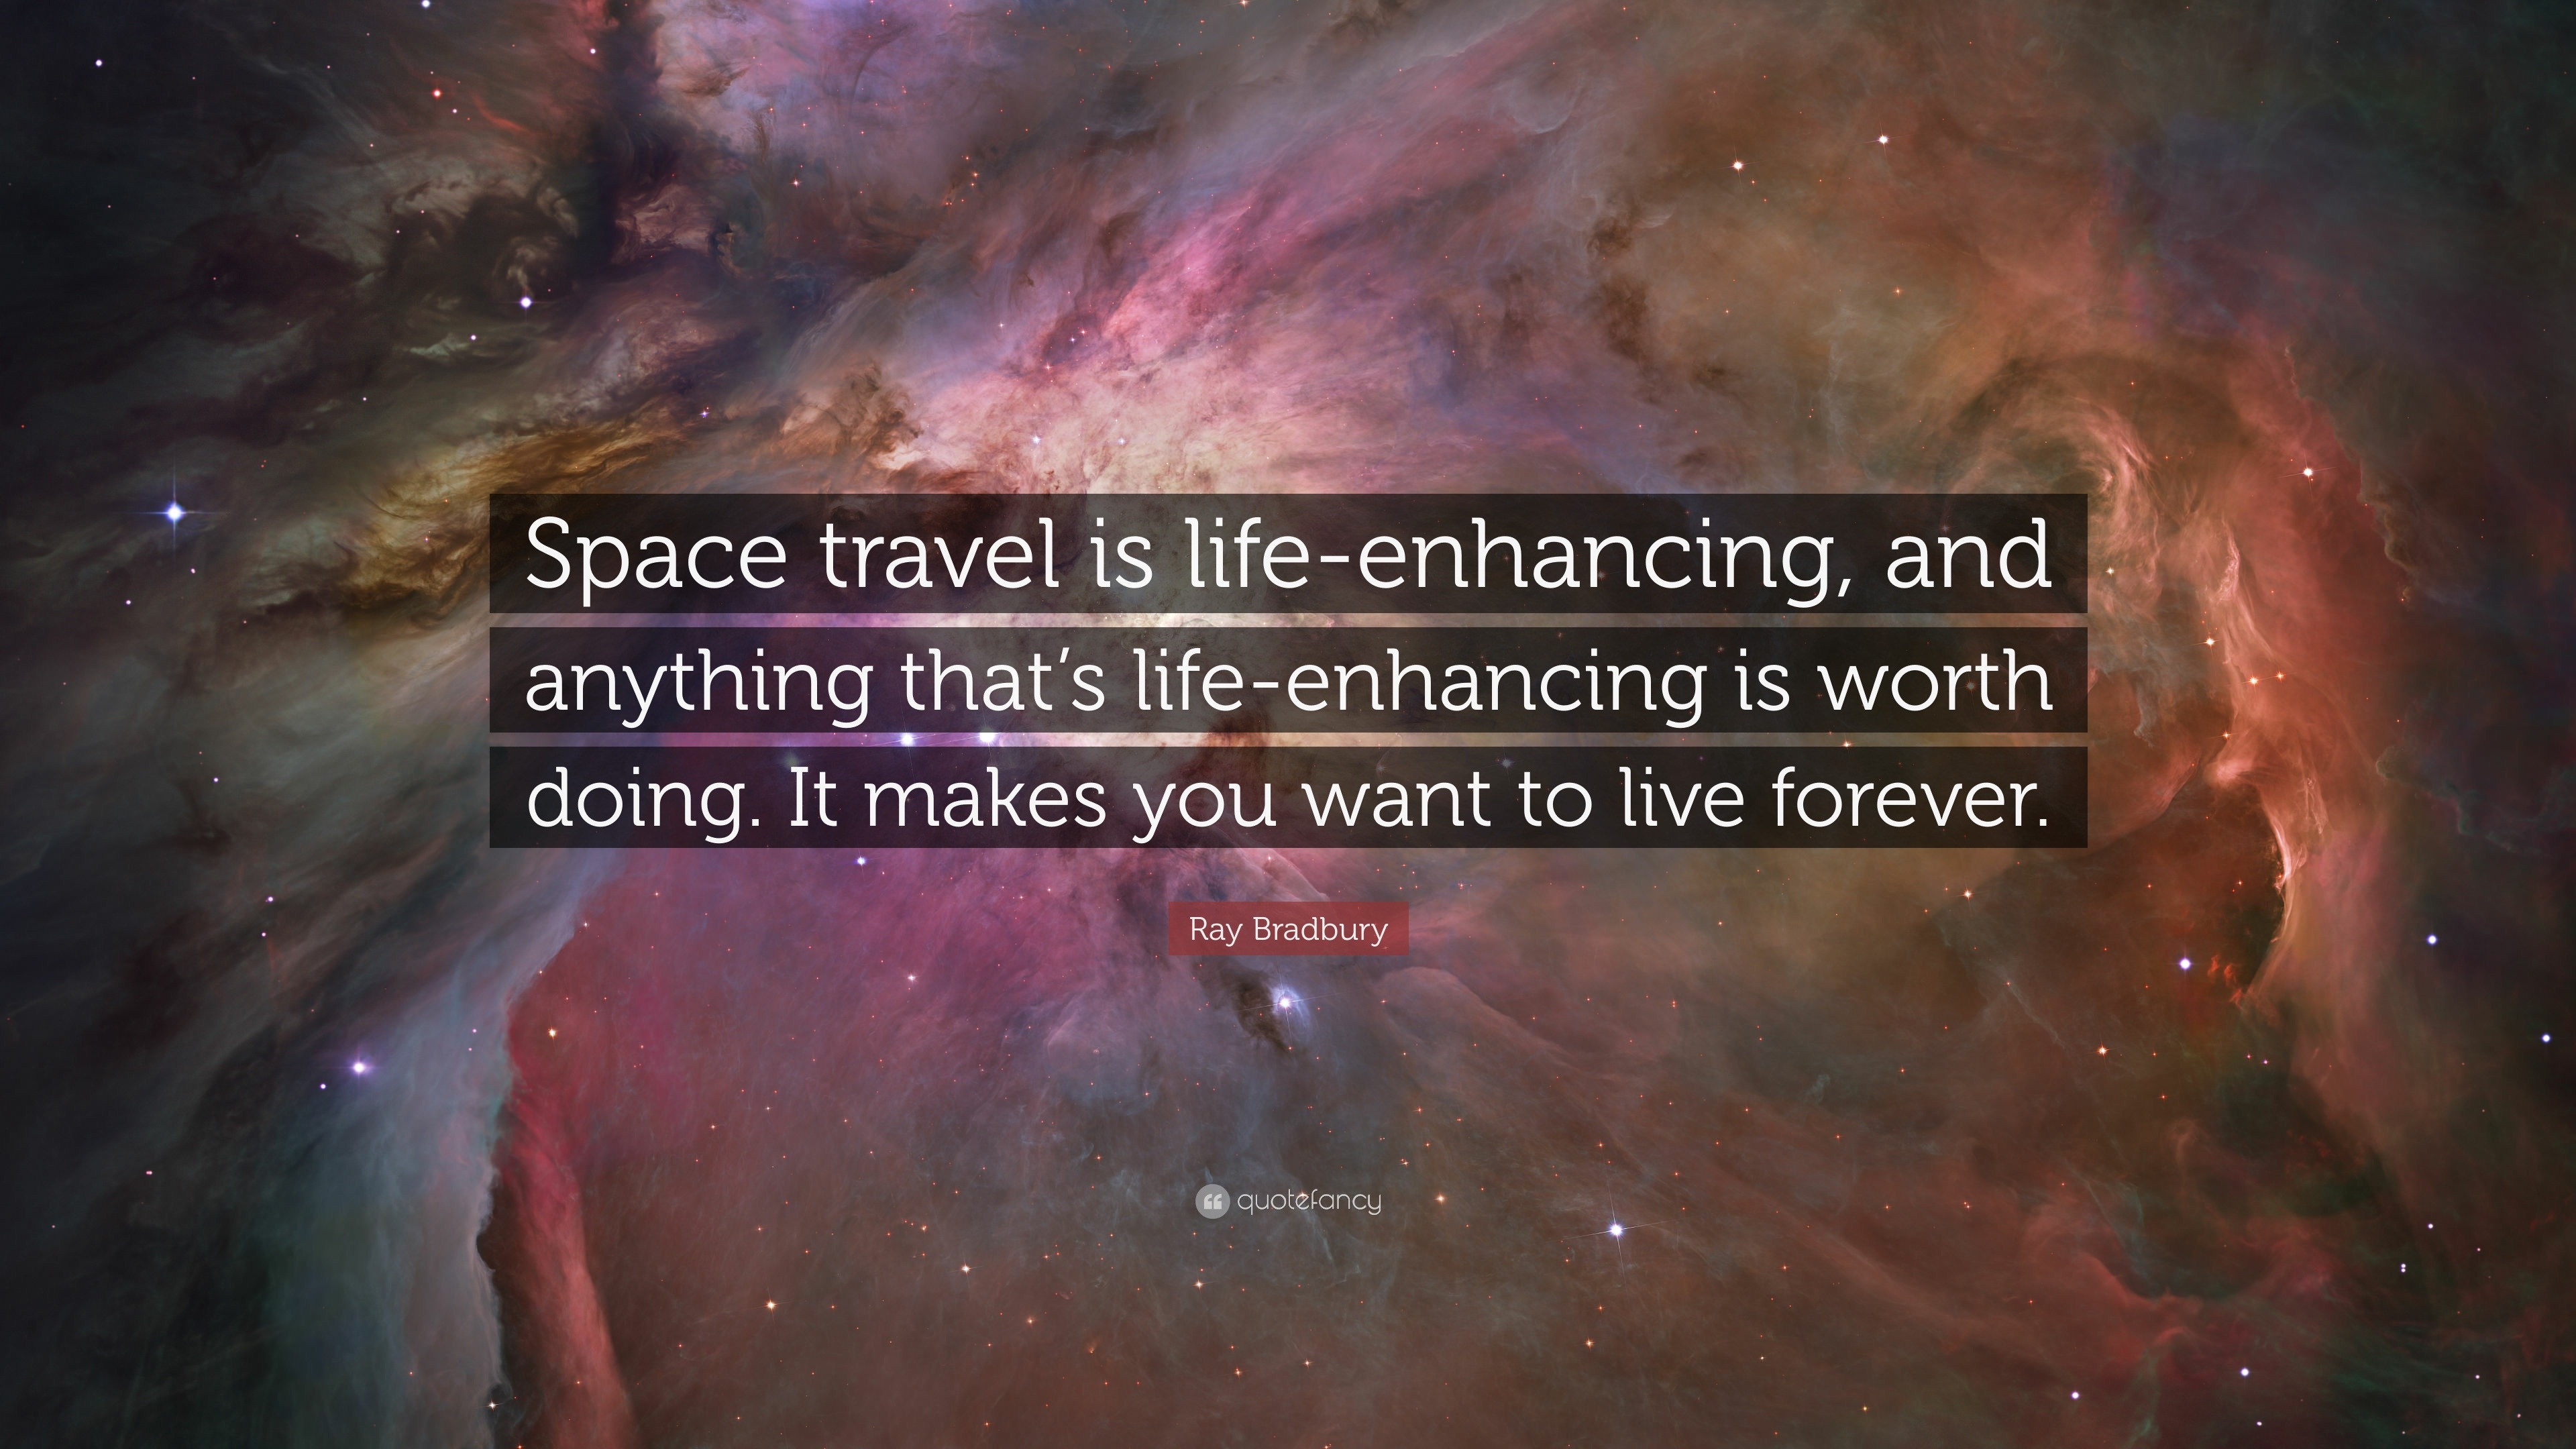 some words about space travel